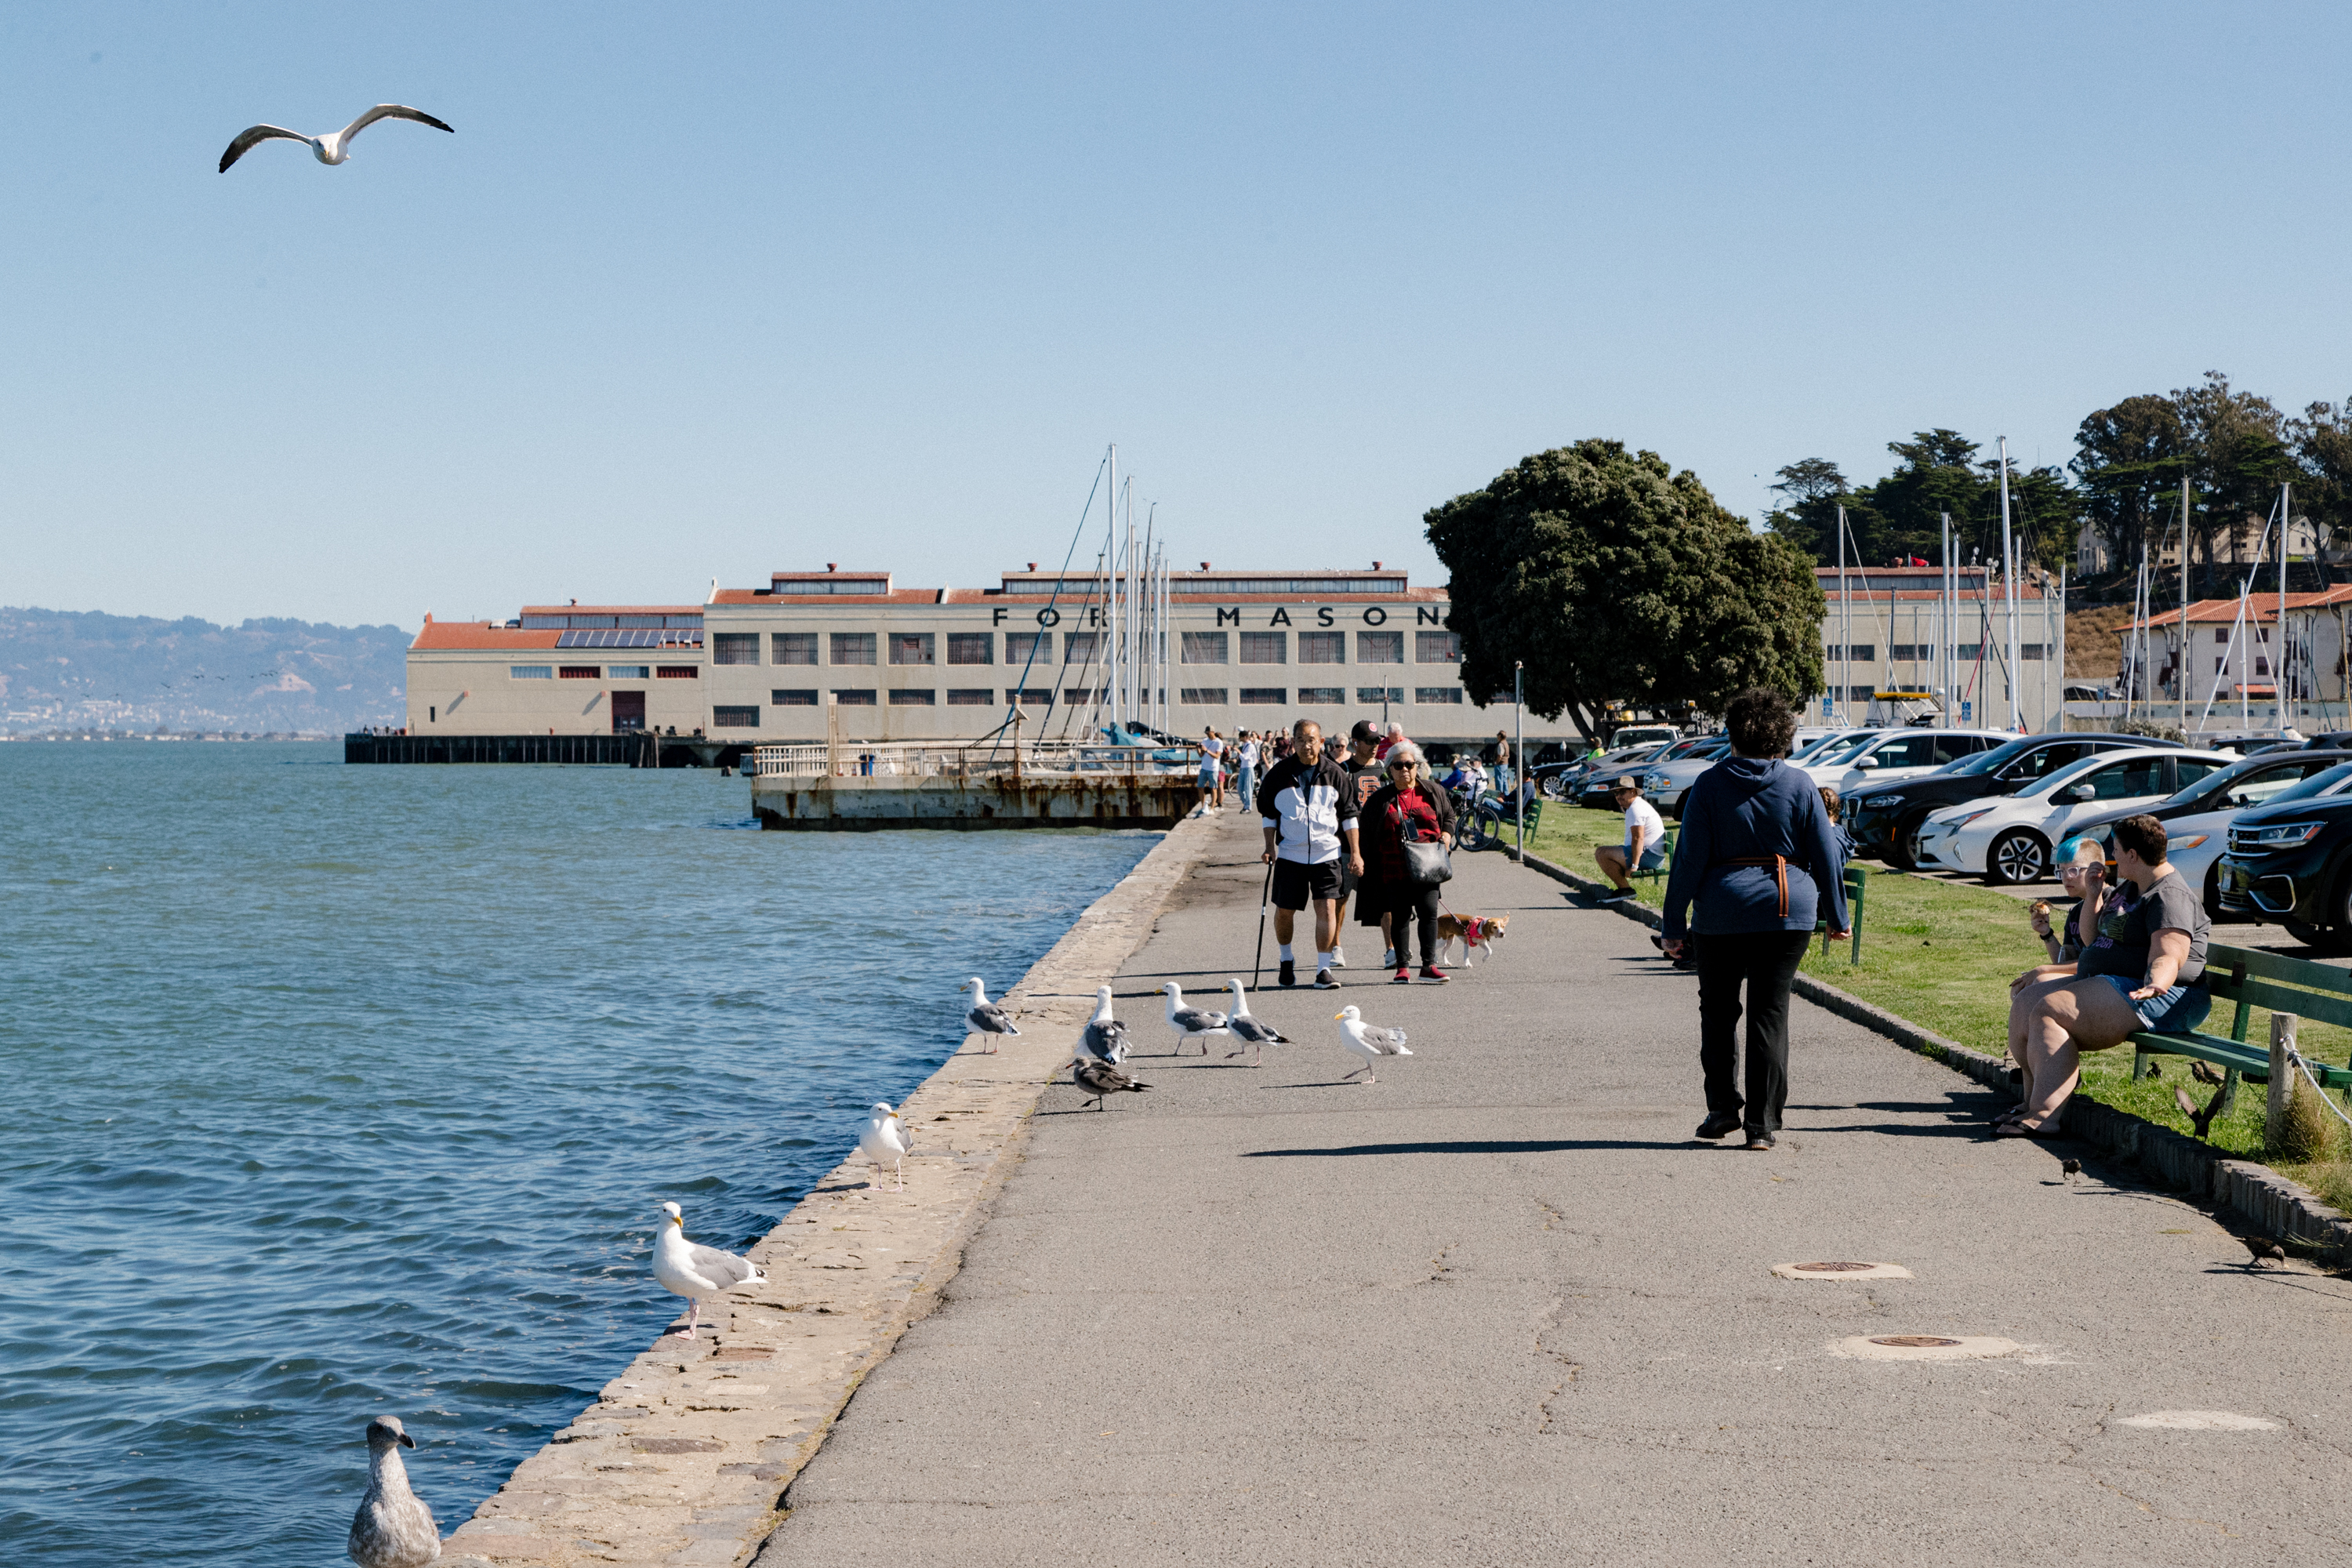 People stroll by the water near Fort Mason, seagulls on the path, a clear blue sky overhead.